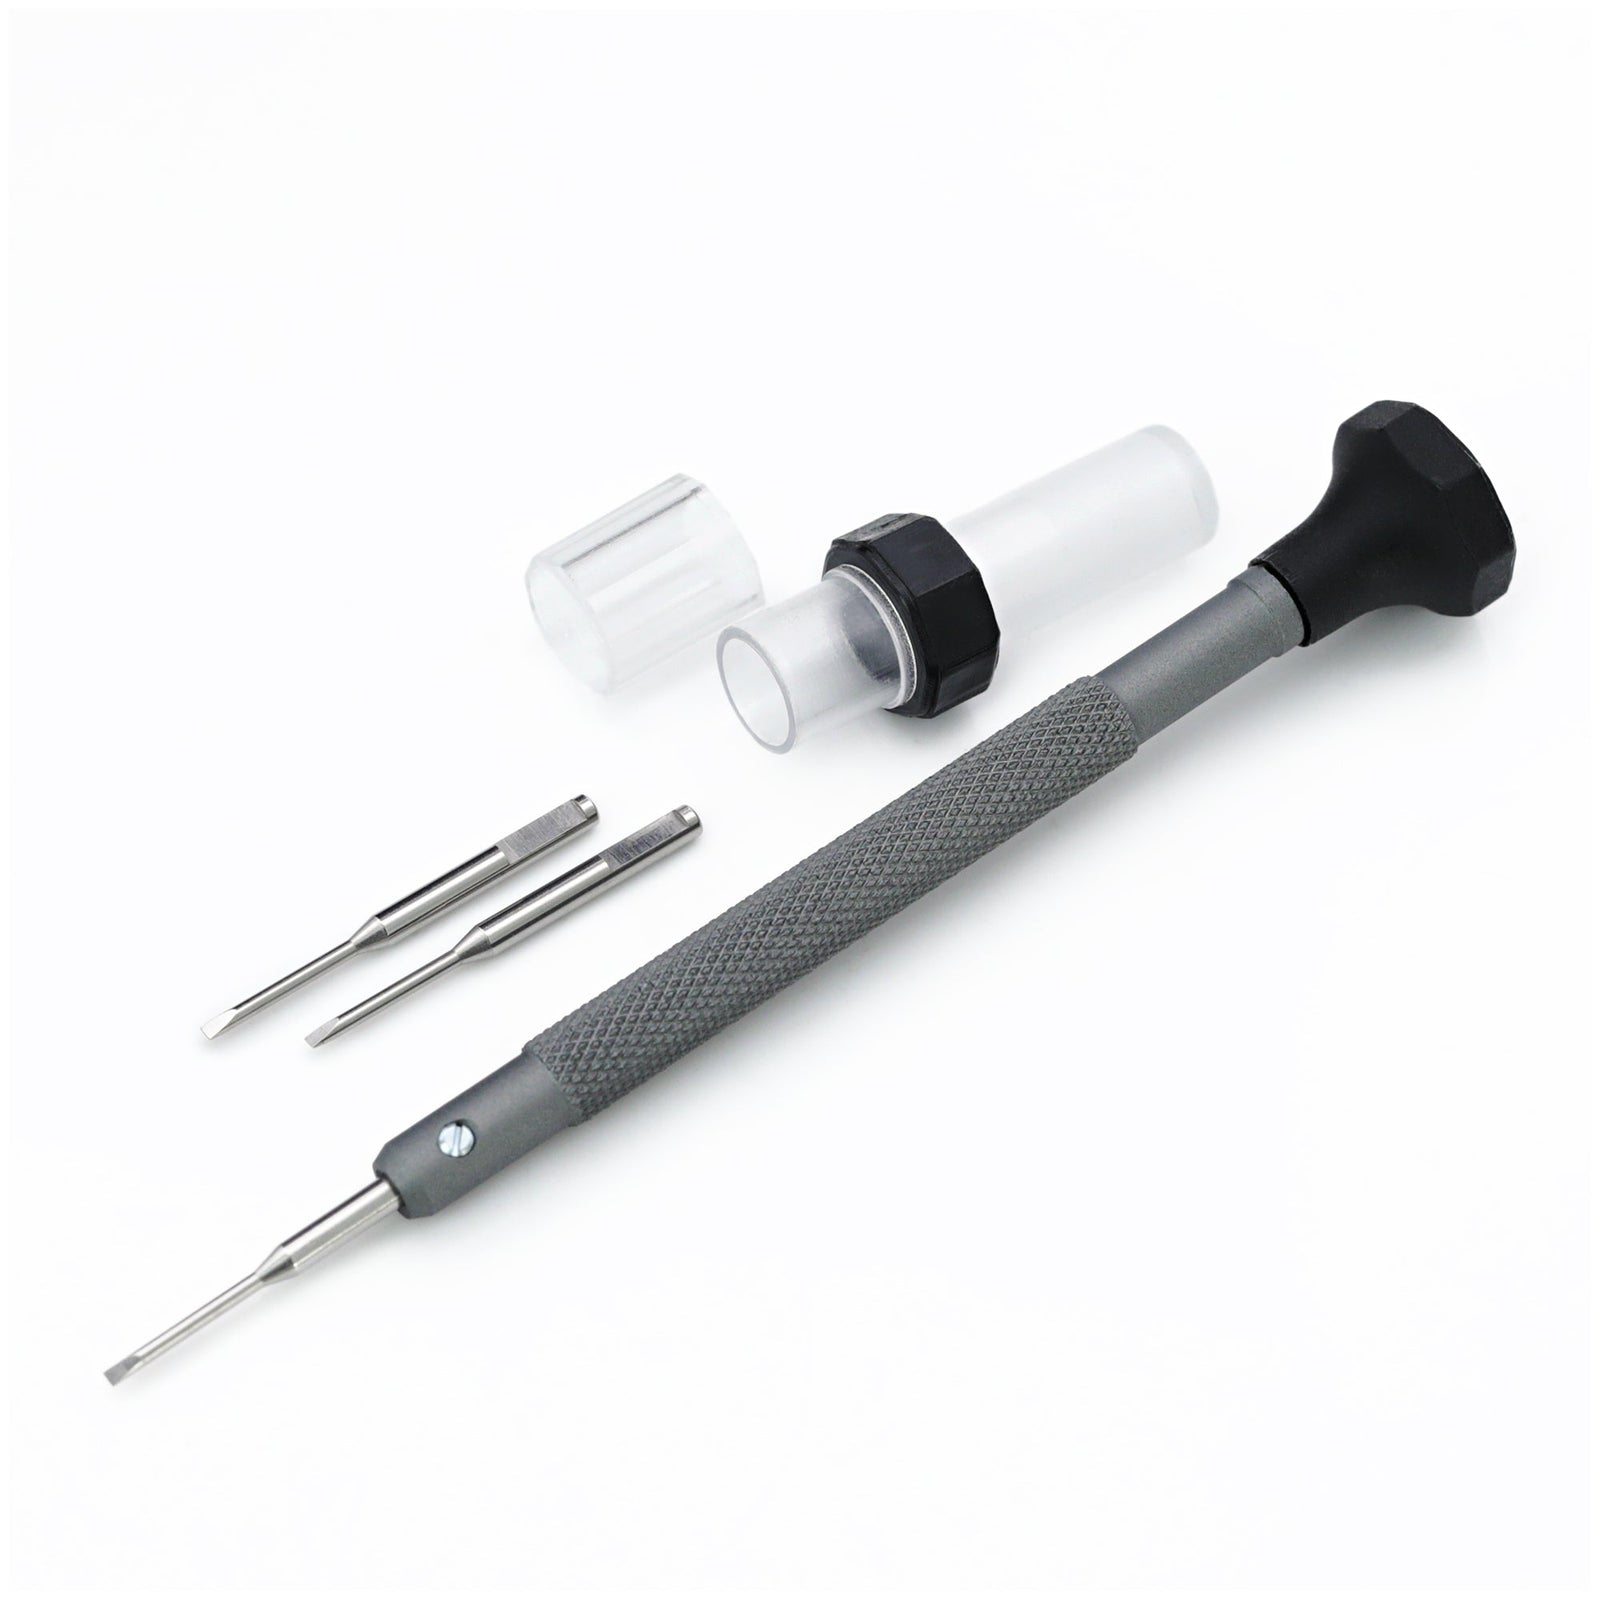 Watch Bands Flat-head small screwdriver 5 sizes options